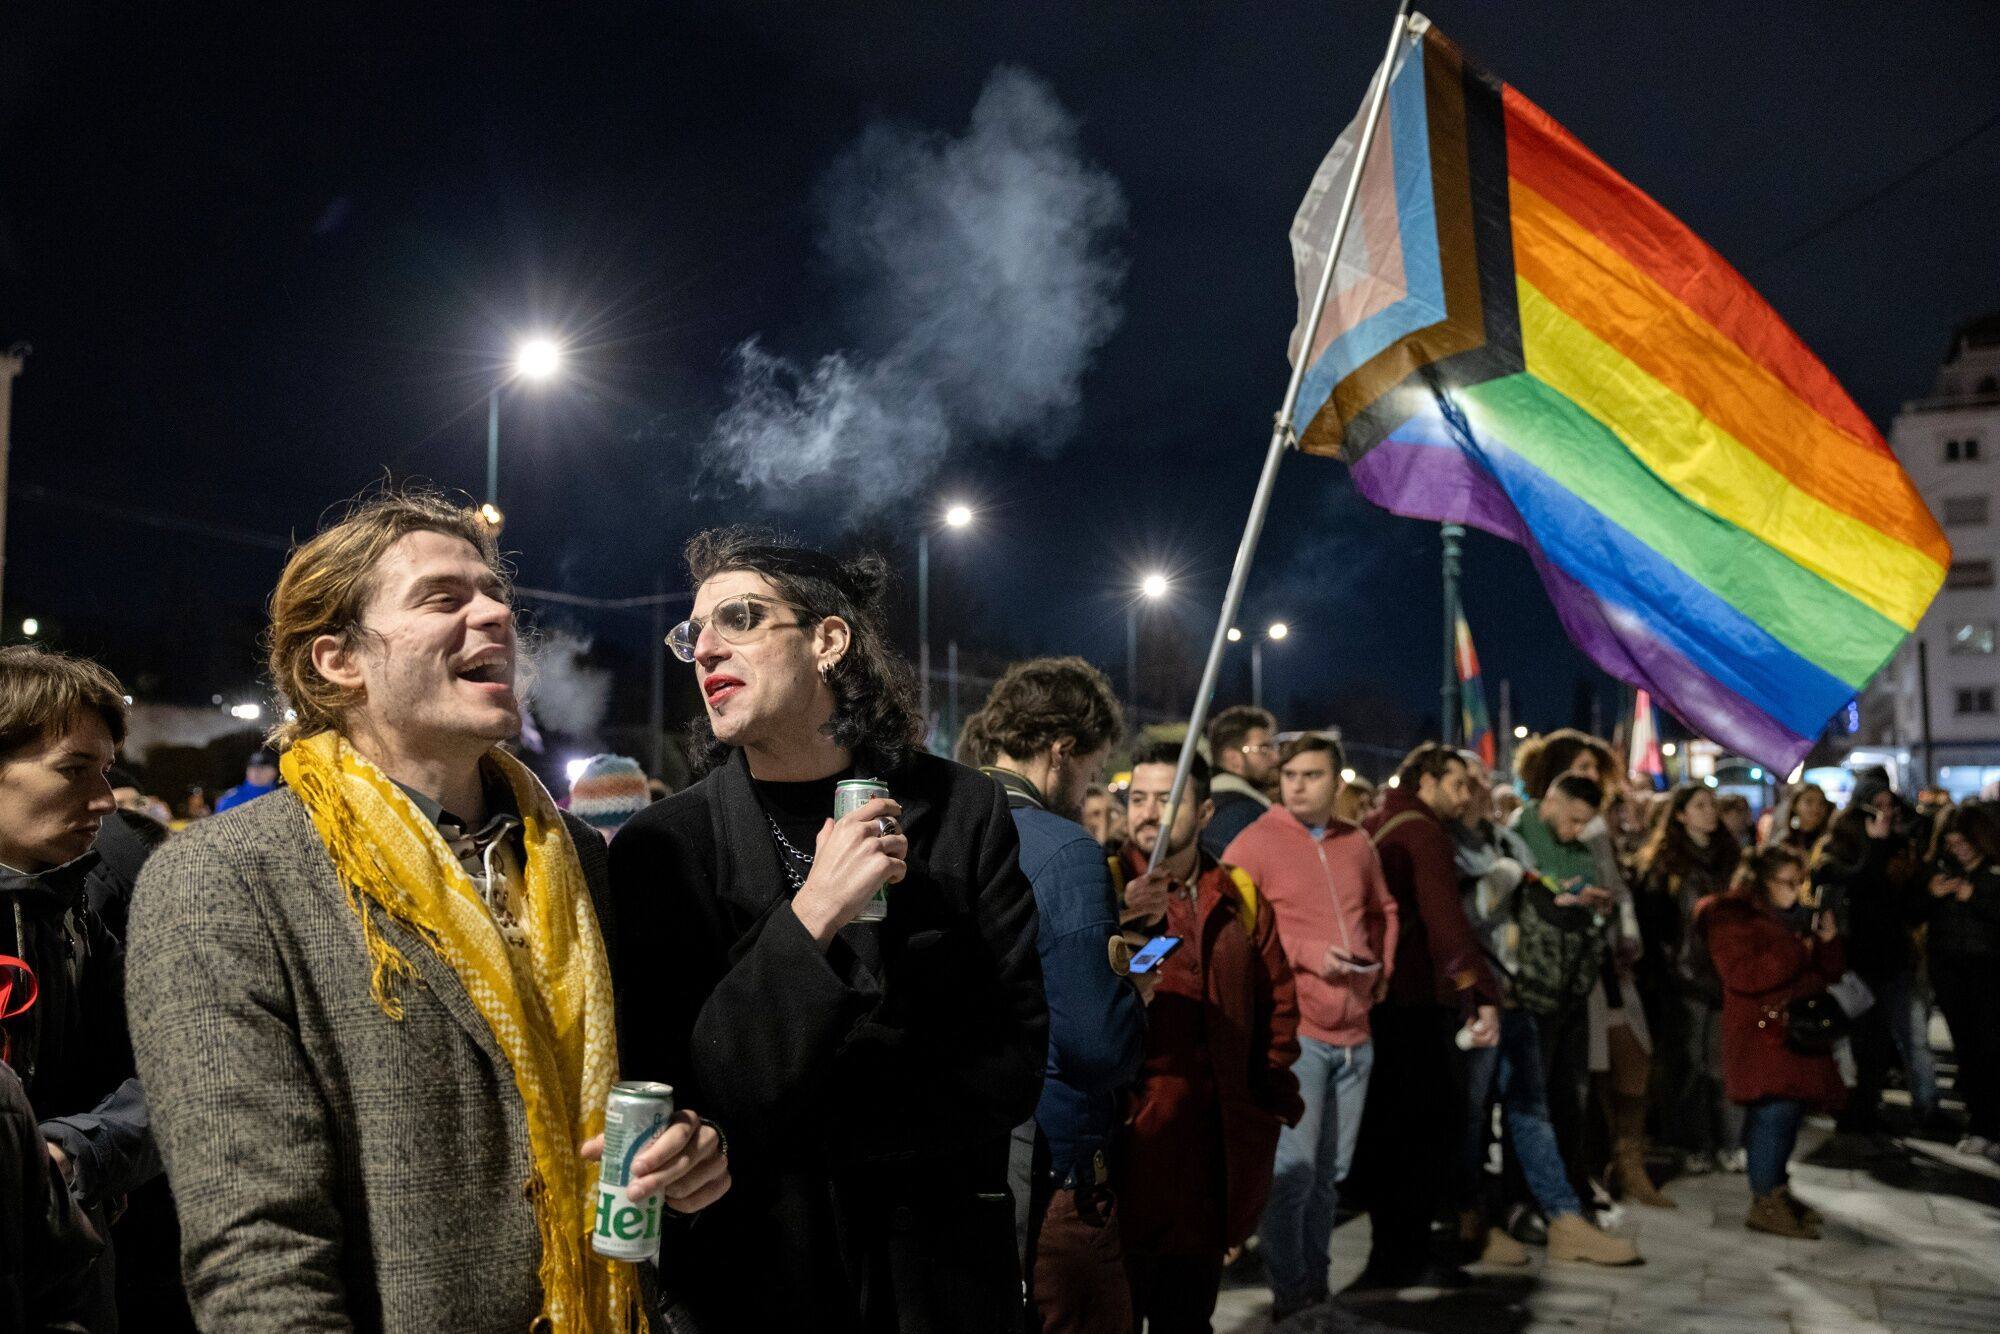 Supporters of the same-sex marriage bill outside the parliament building in Syntagma Square in Athens. Photo: Bloomberg